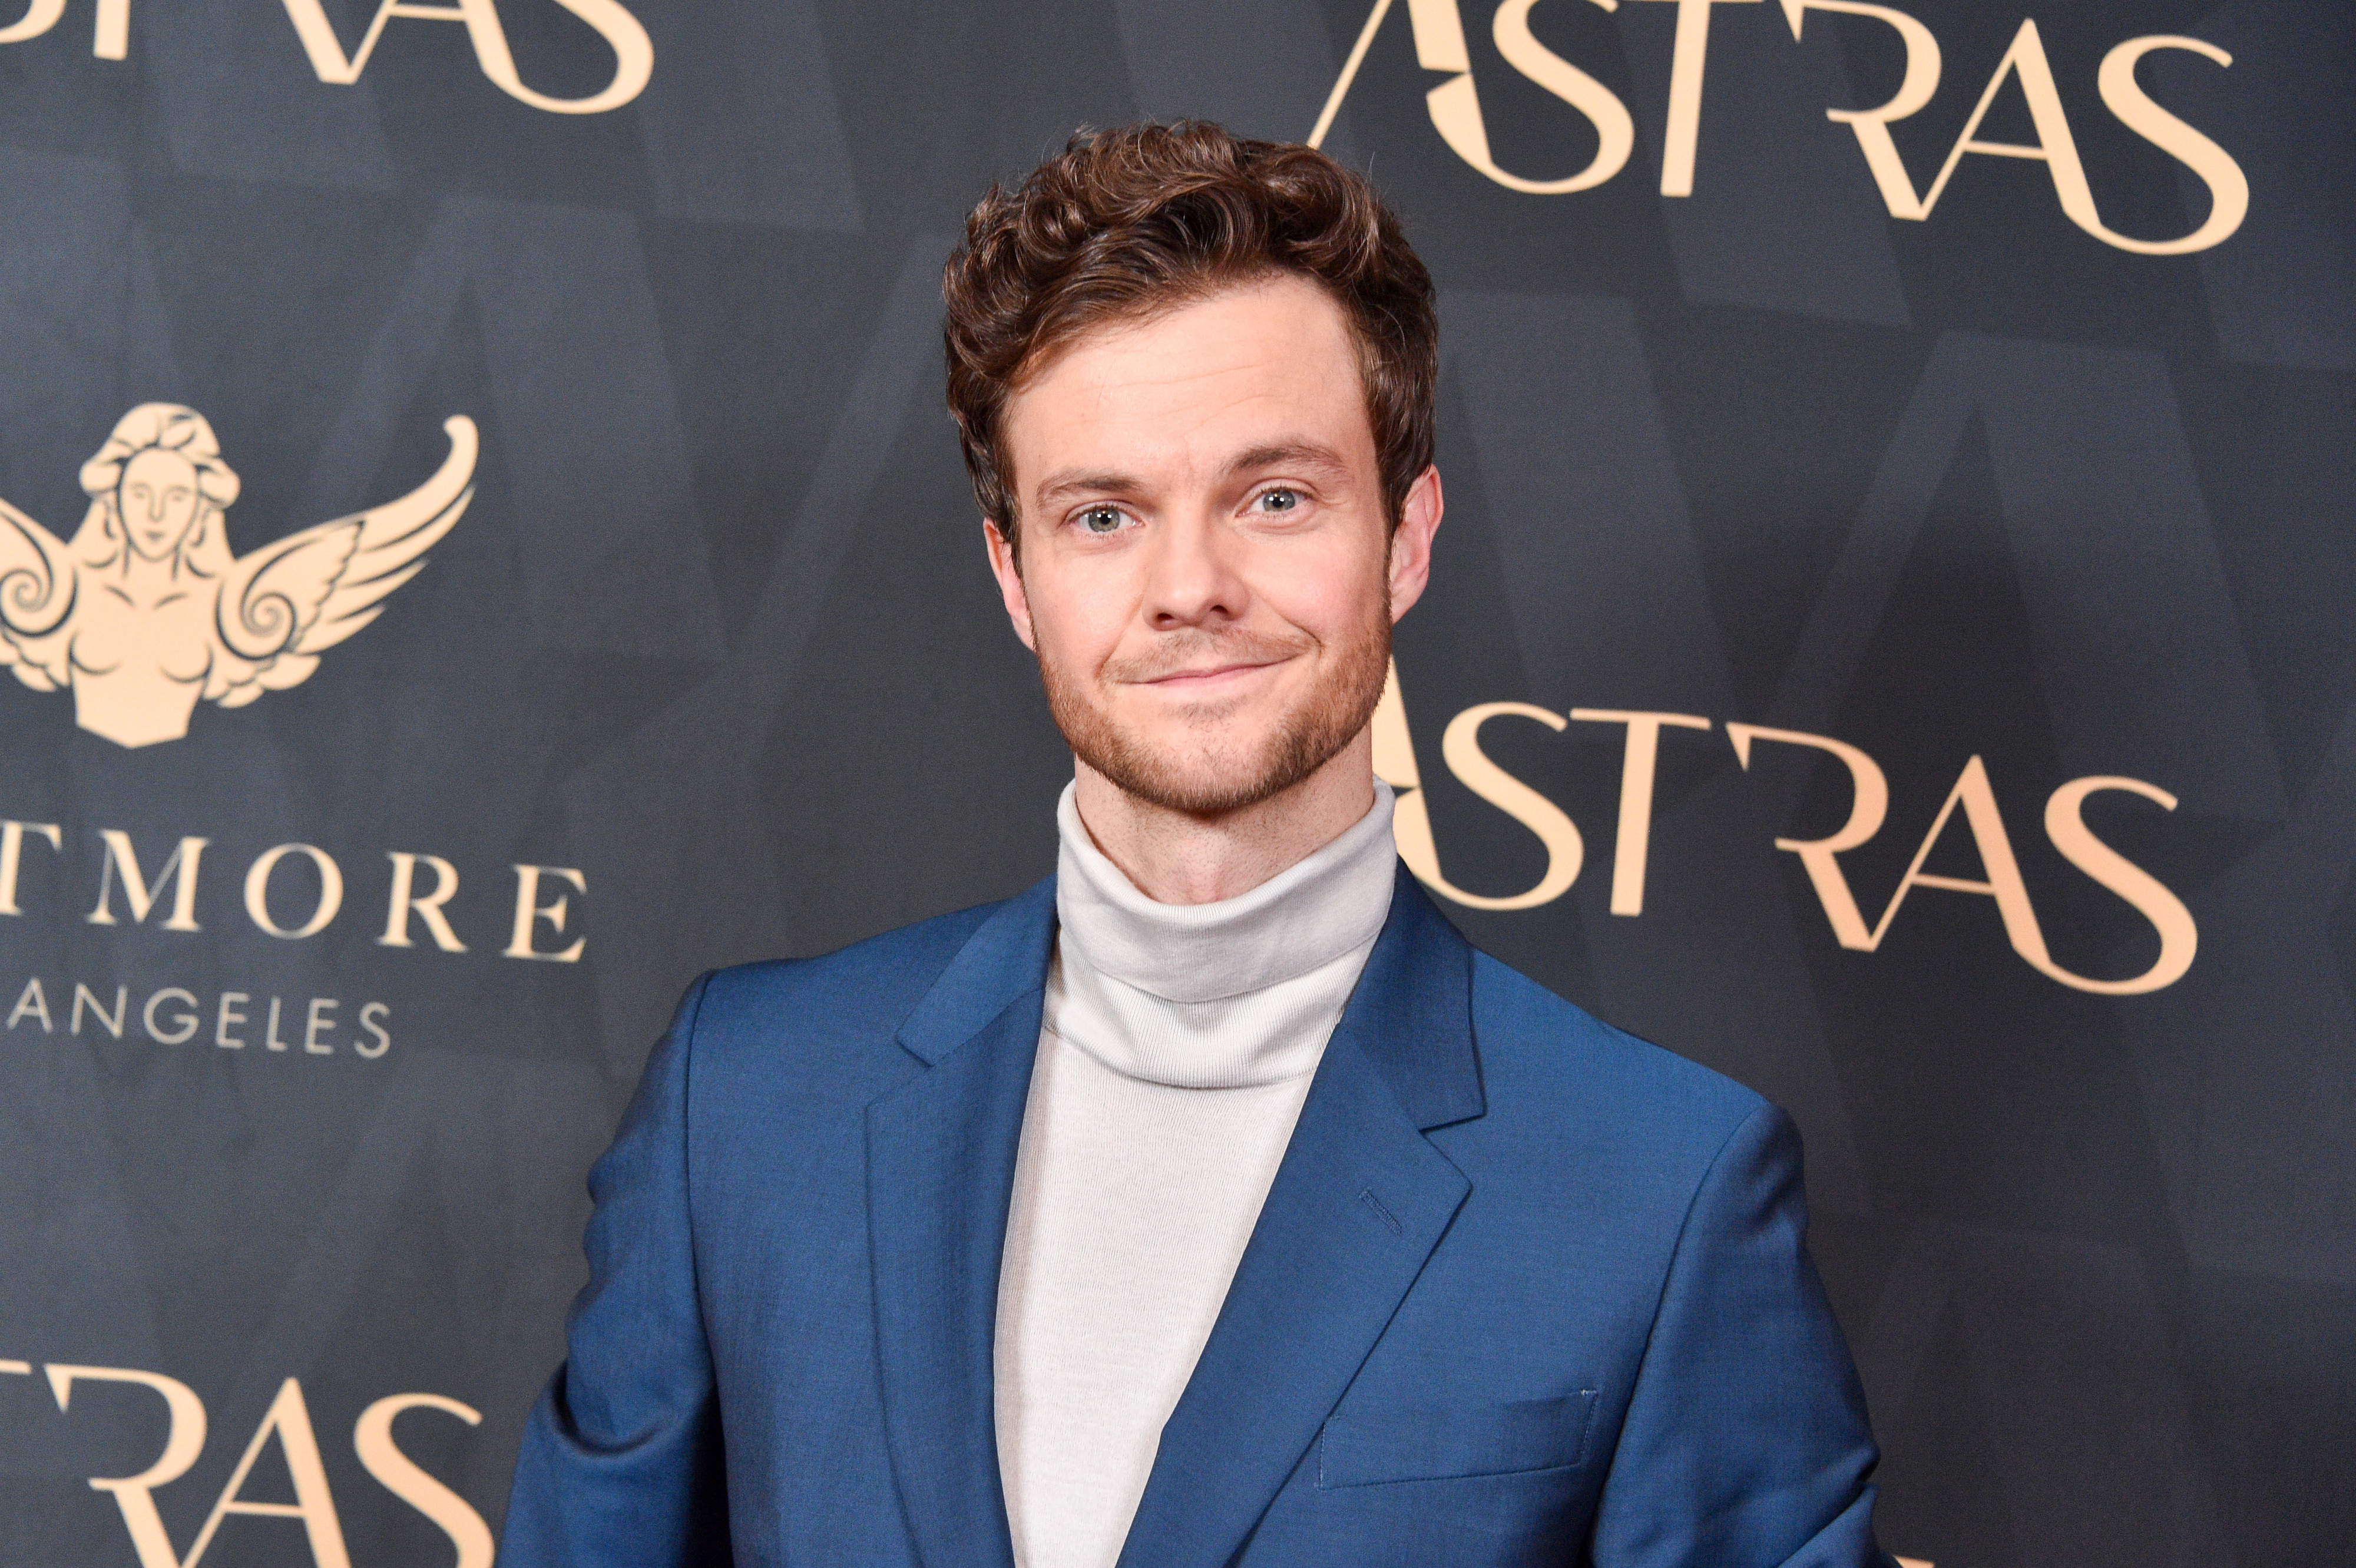 Jack Quaid, in a blue suit with a white turtleneck, poses on the red carpet at an event